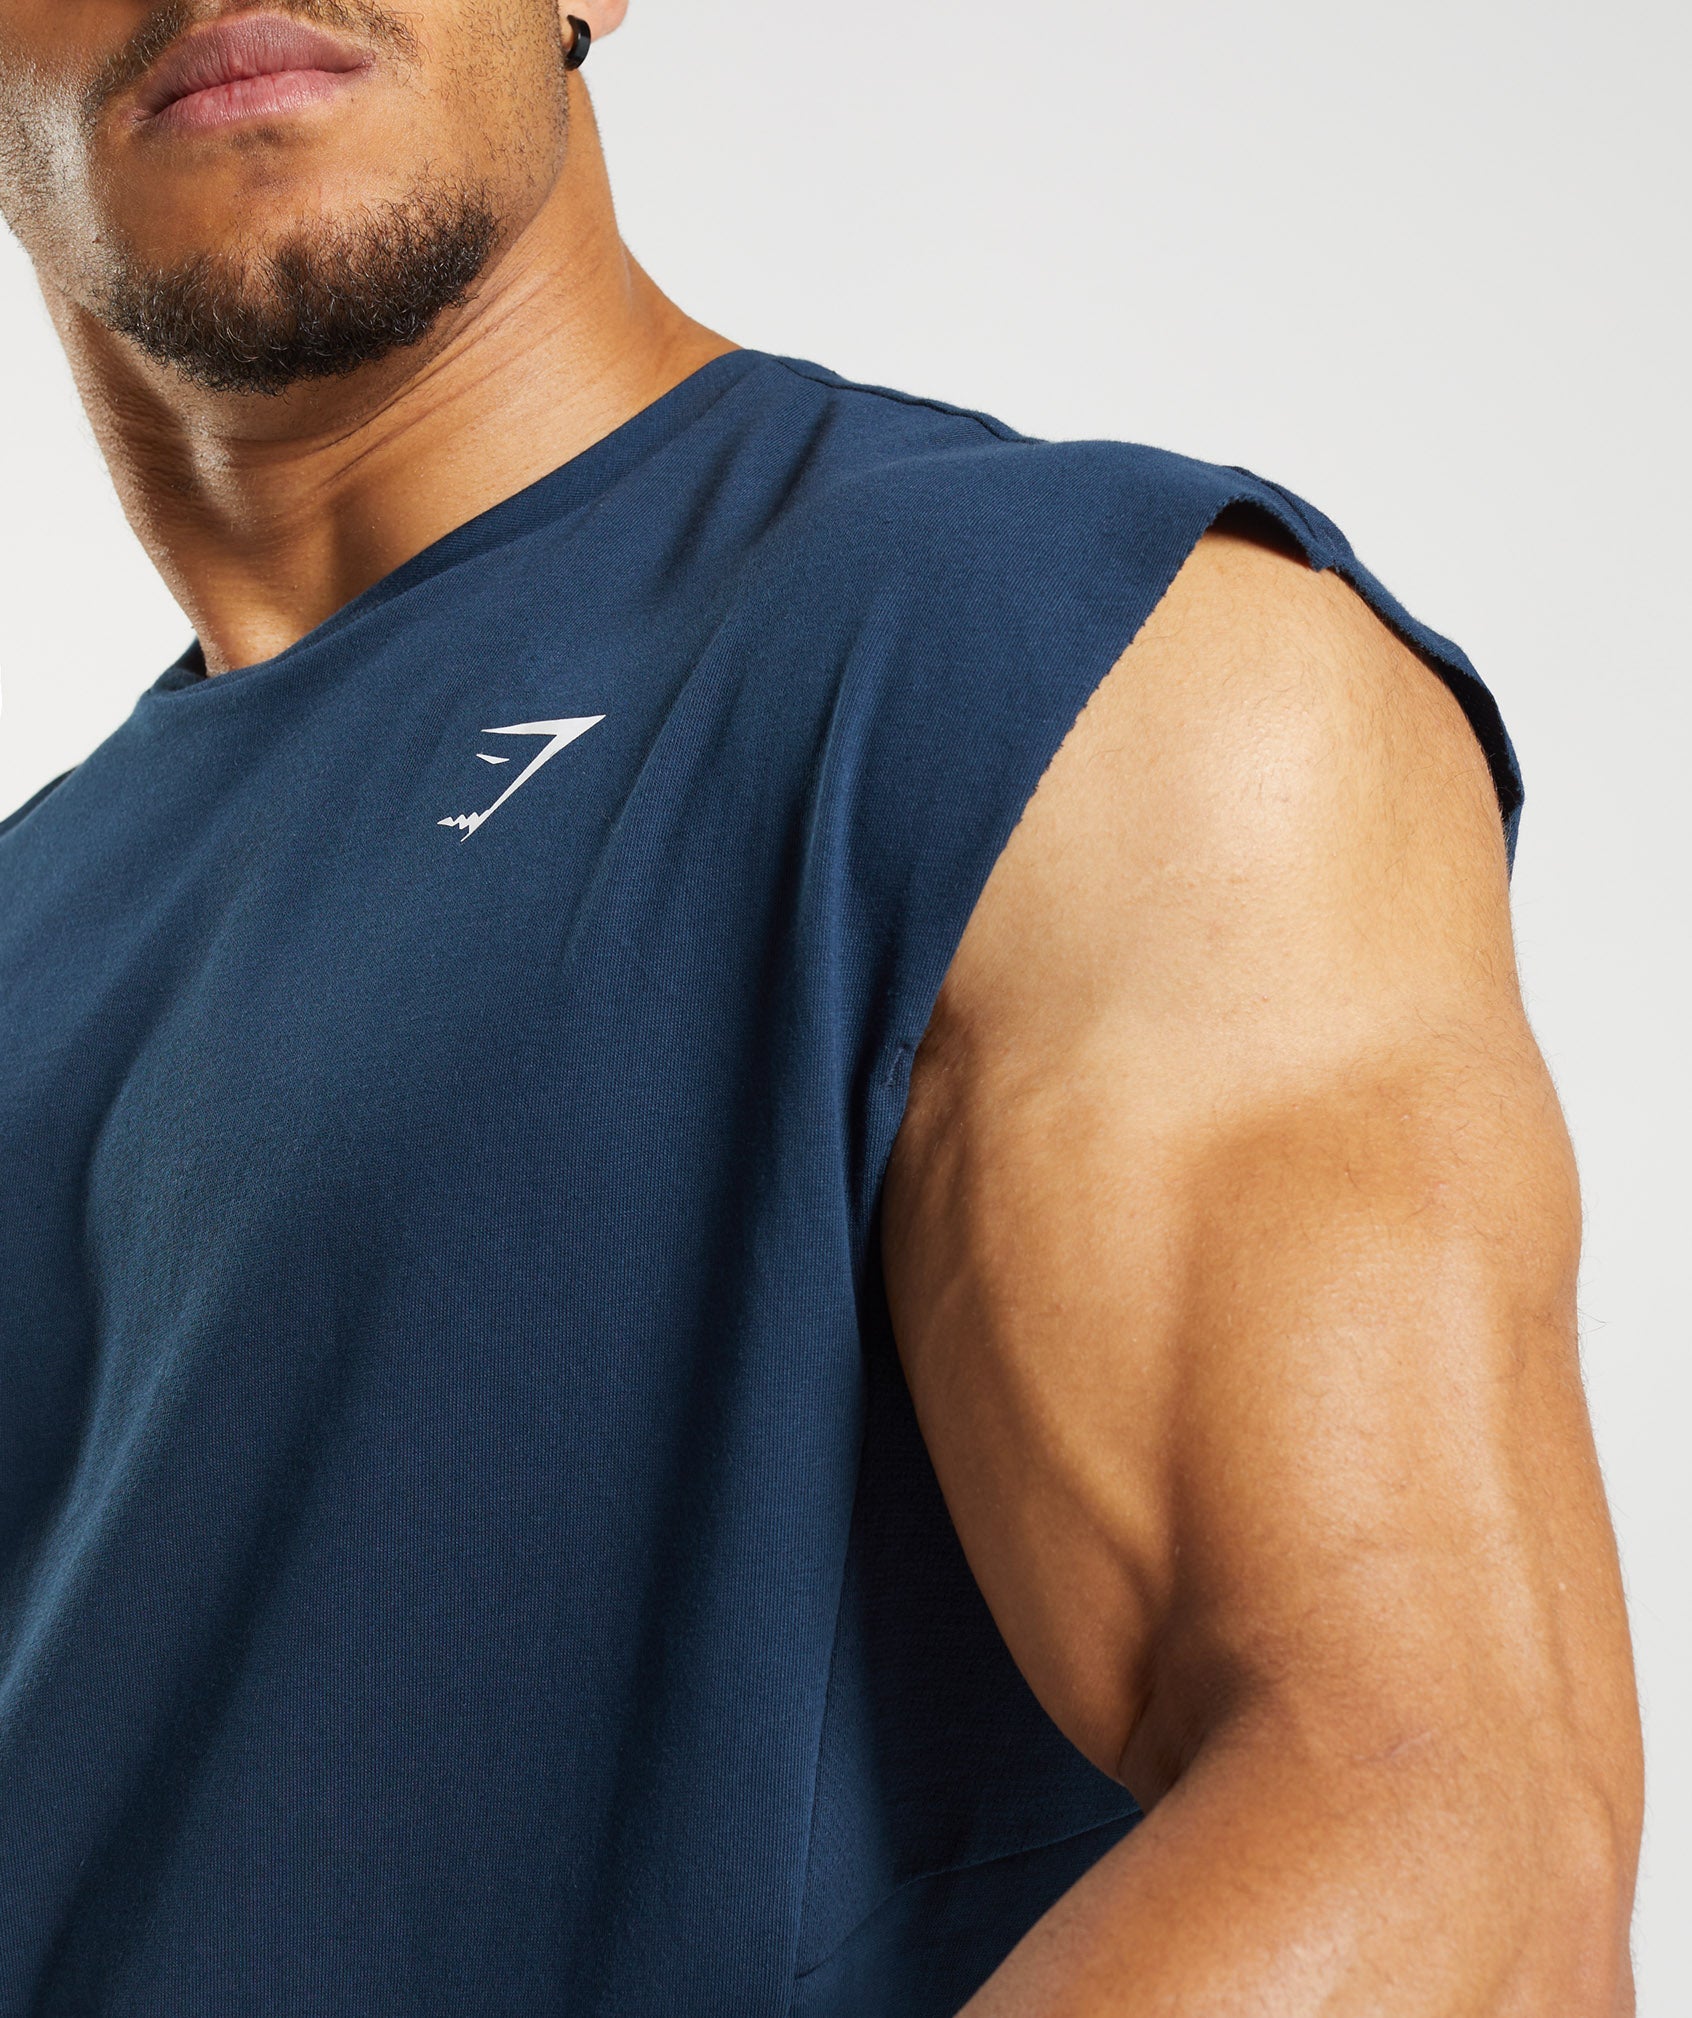 React Cut Off Tank in Navy - view 5